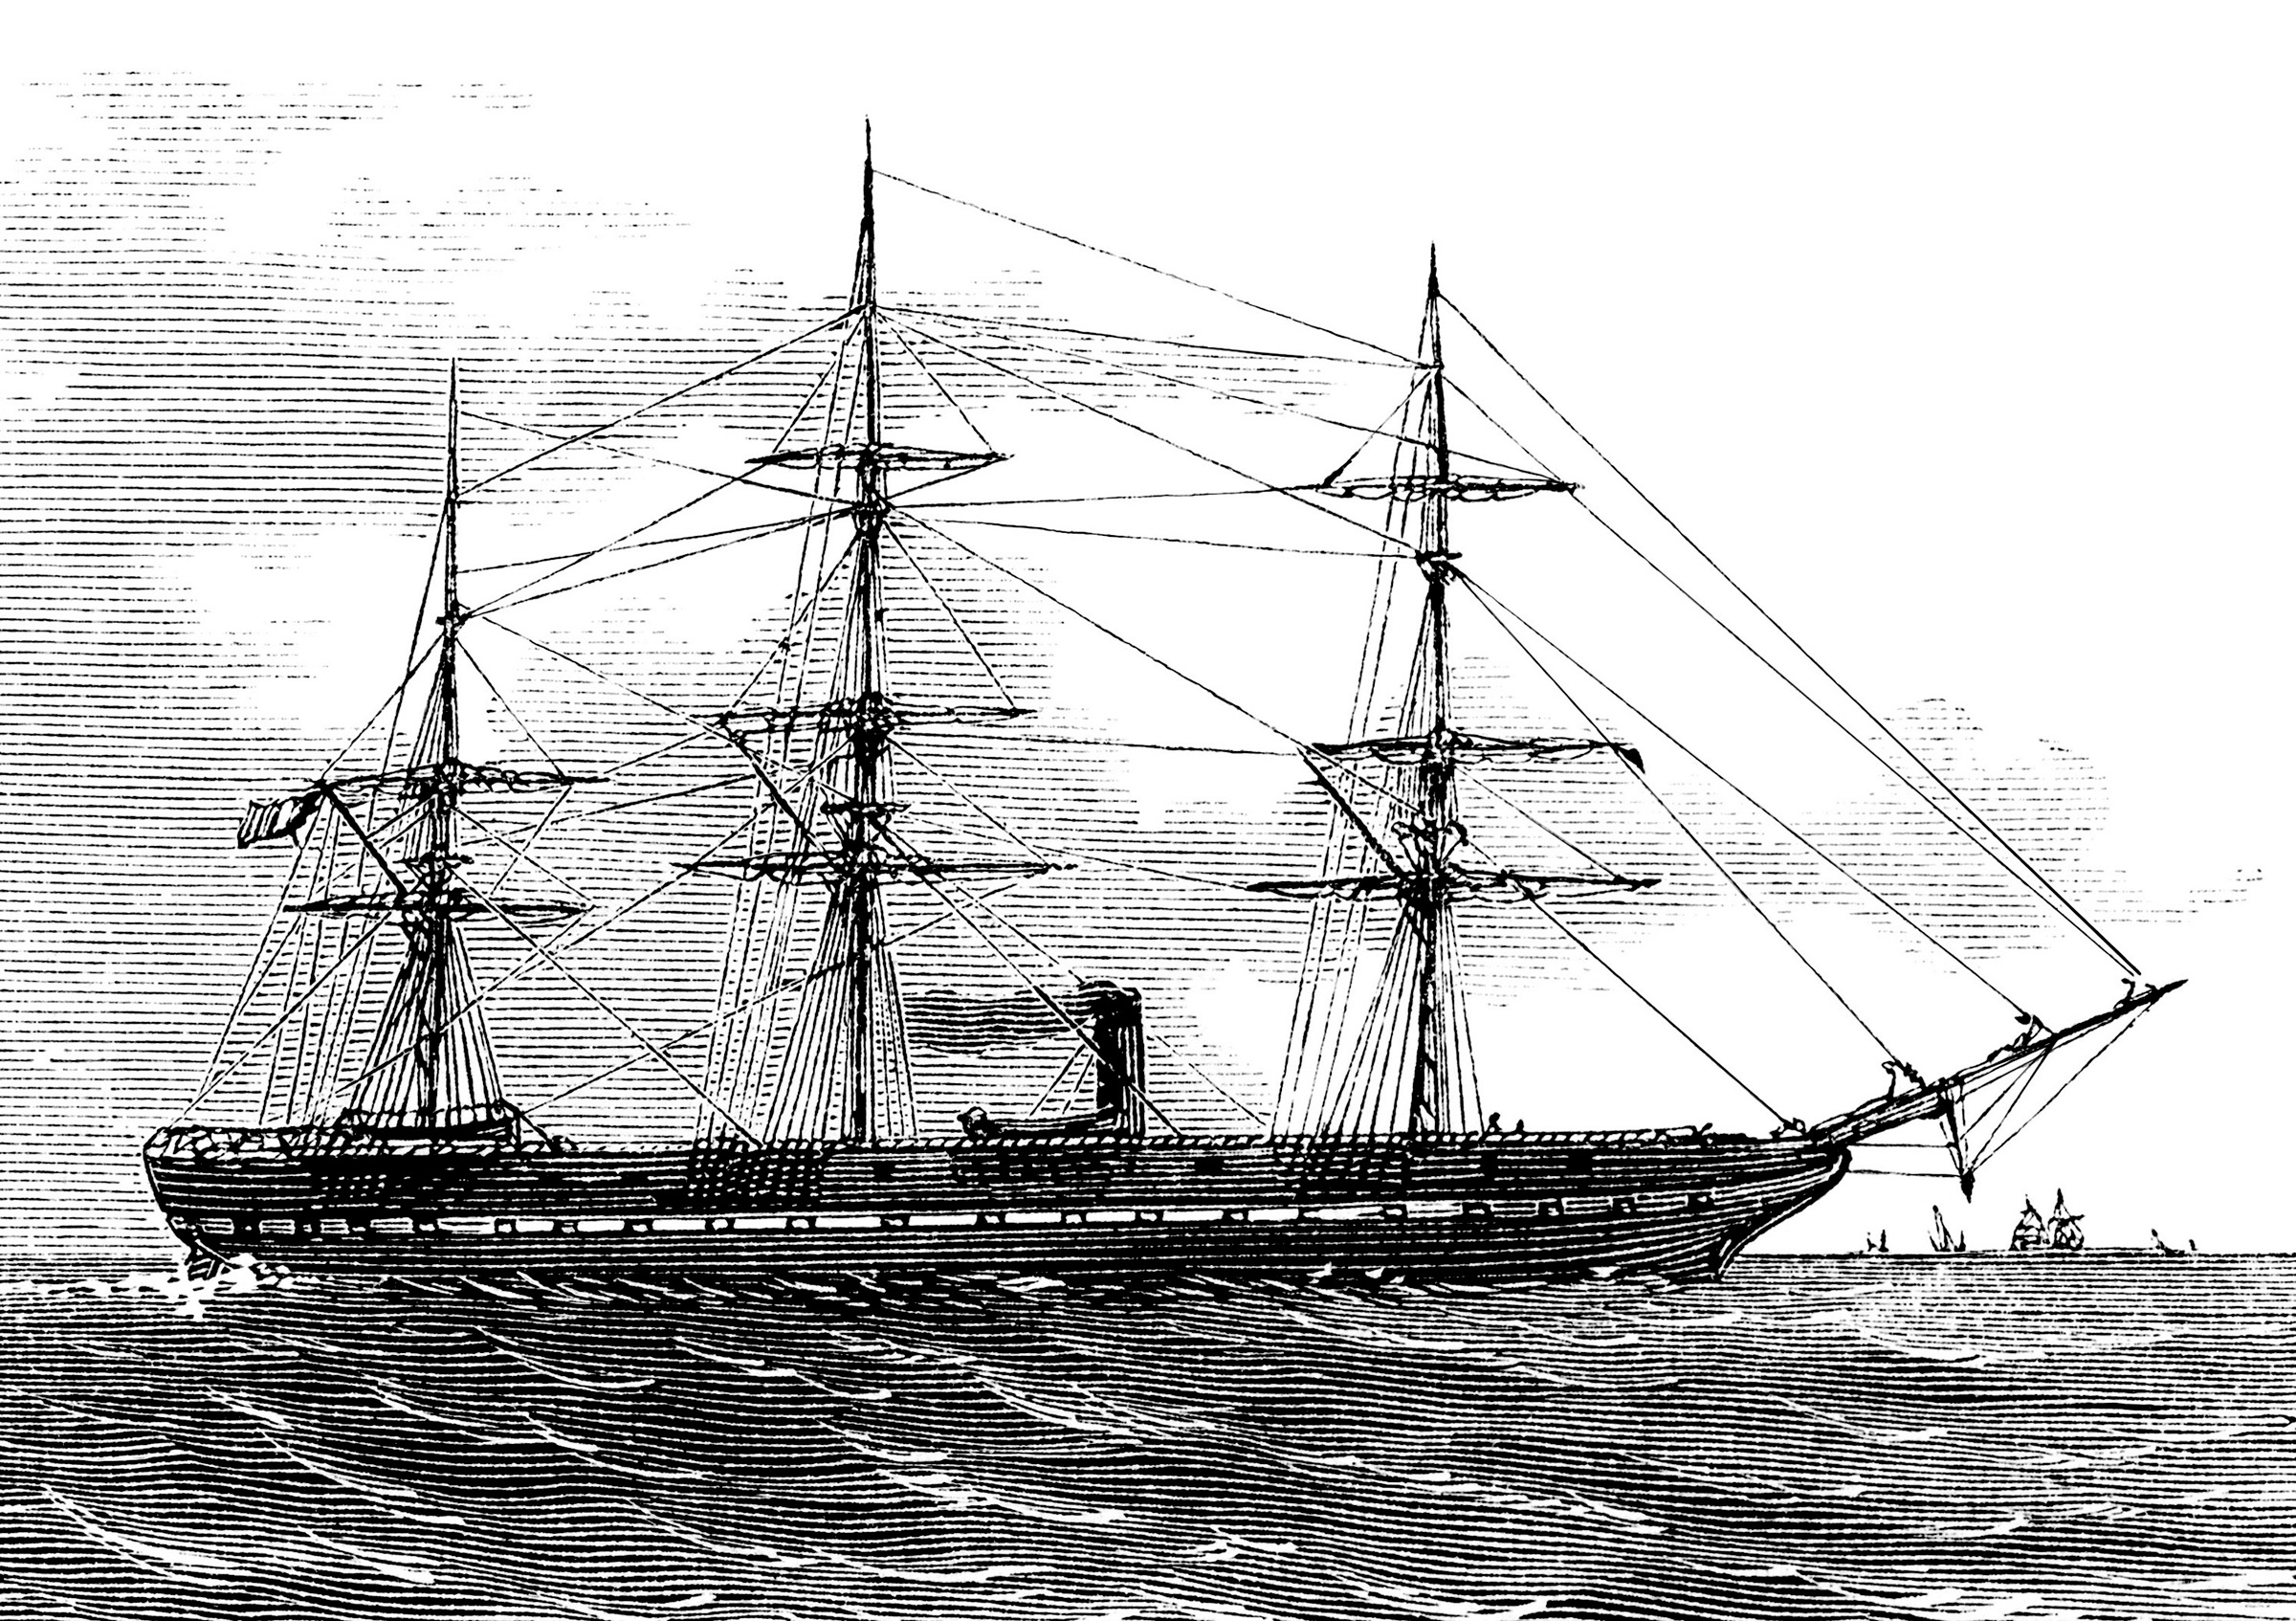 Is A Vintage Engraving Of A Beautiful Sailing Ship  This Type Of Ship